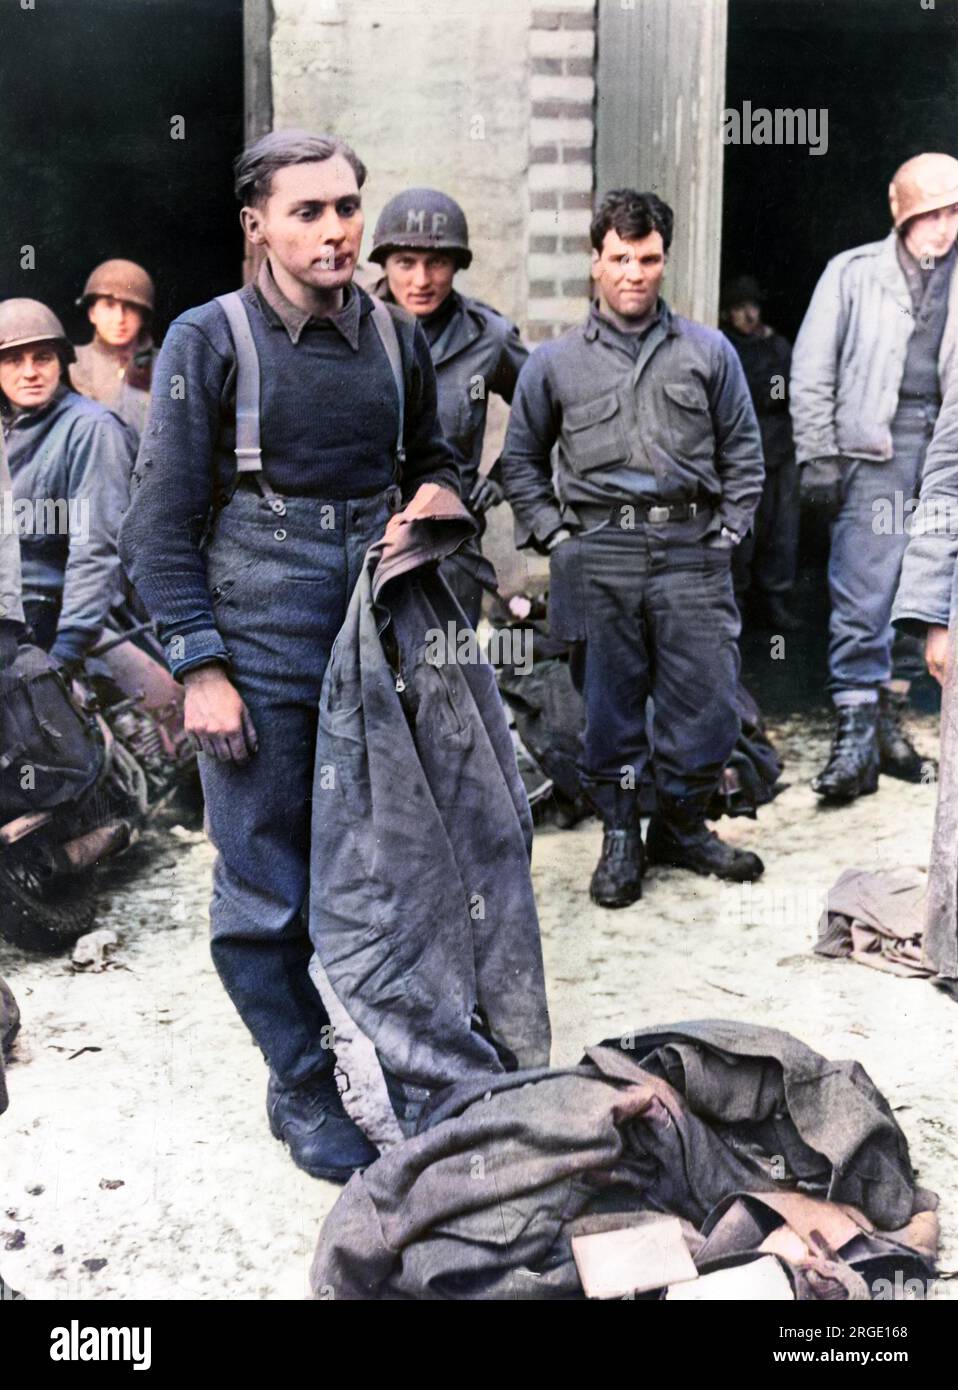 A captured German soldier during the Ardennes counter-offensive is shown holding a pair of American army trousers. He may have been a member of the S.S. unit commanded by Otto Skorzeny, whose men were instructed to wear captured Allied uniforms and carry out actions behind Allied lines in order to create confusion. Stock Photo